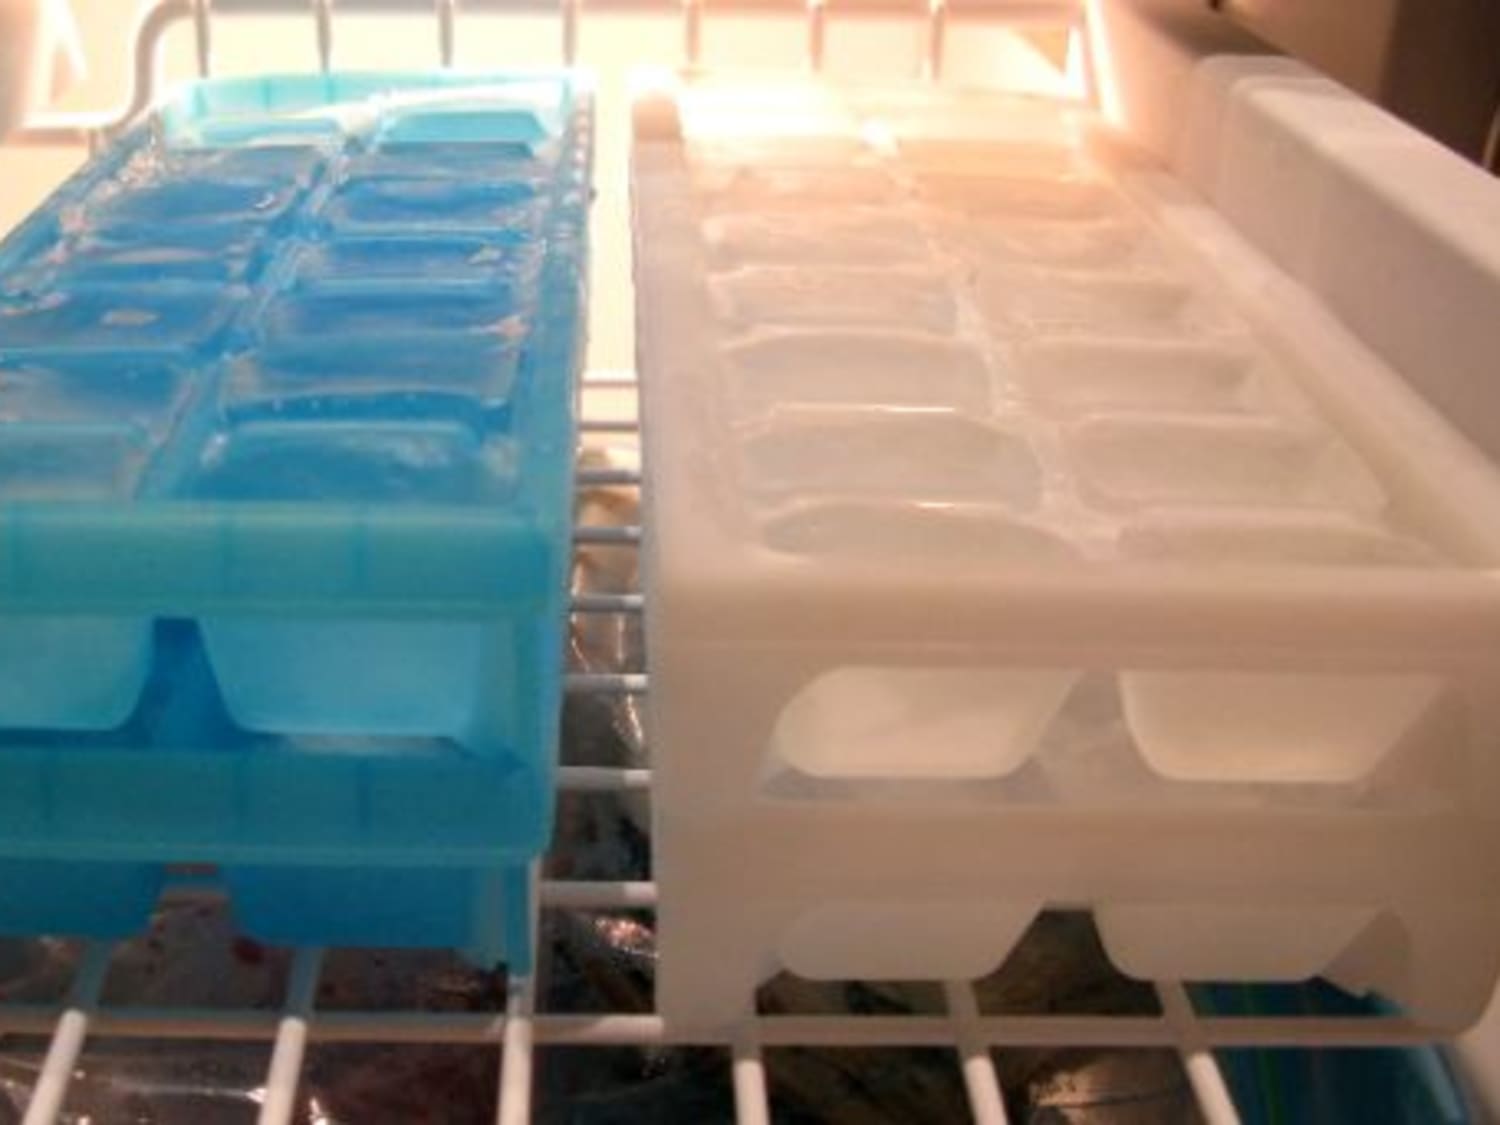 Freezer Organization: Toss an Ice Tray or Two